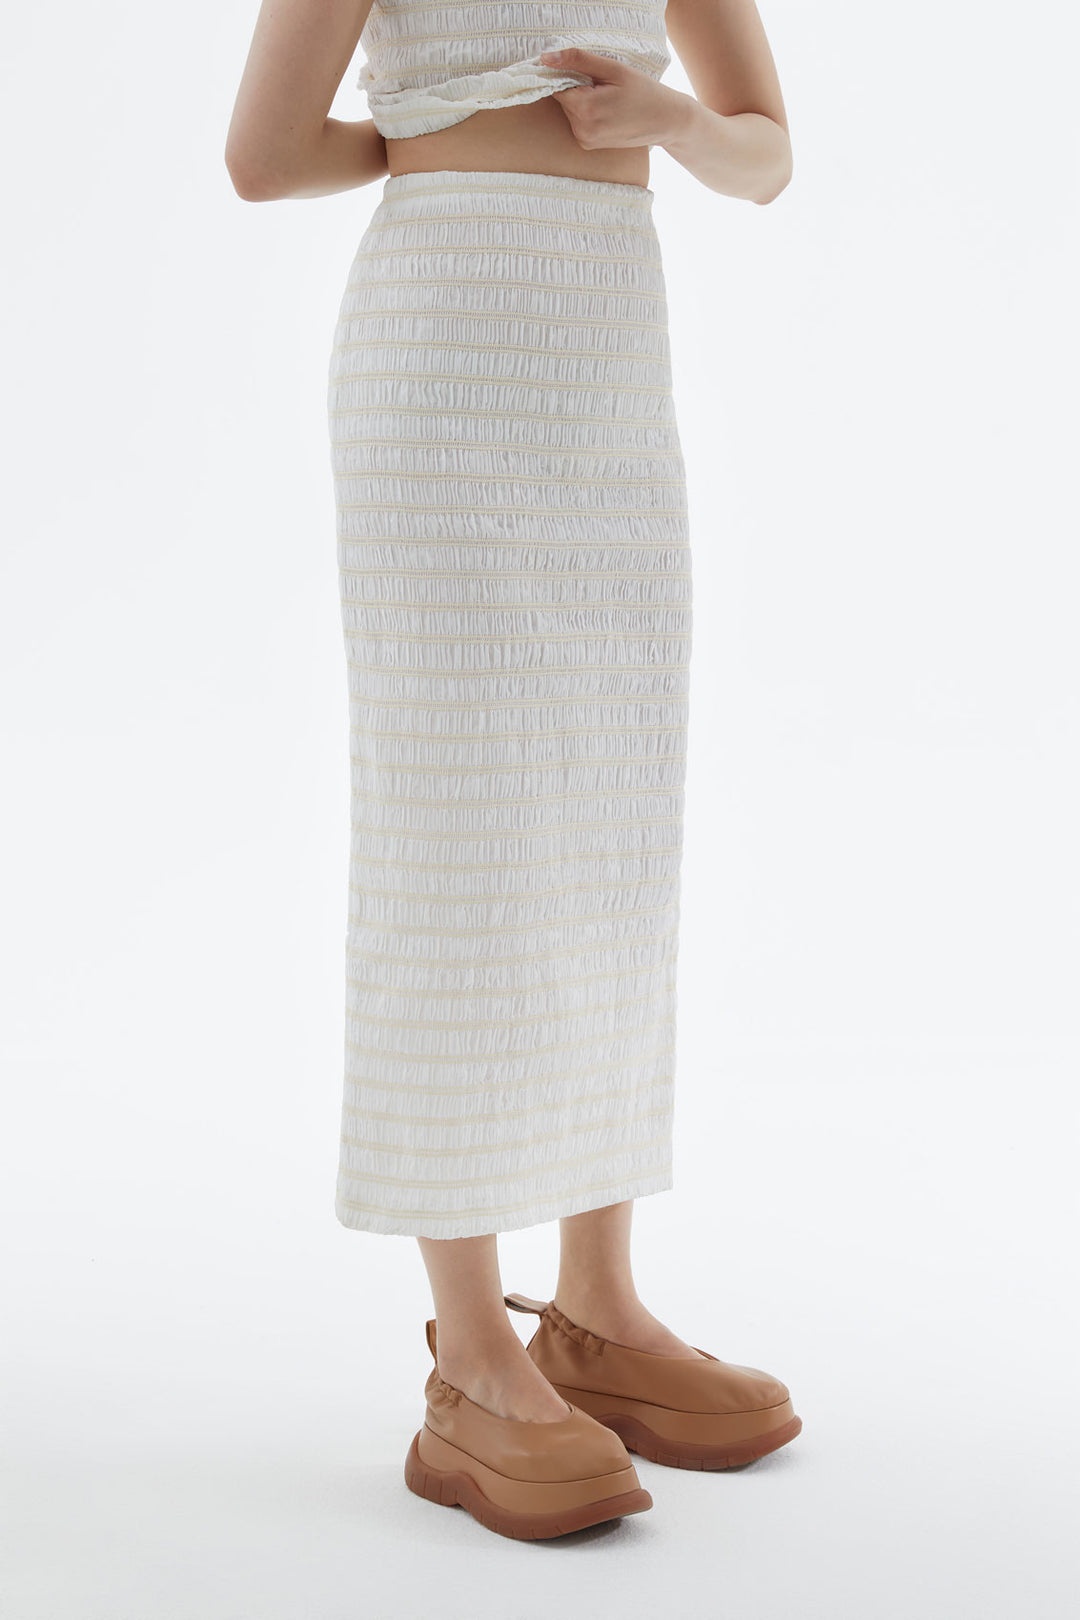 EMBROIDERED CREAM STRETCH SKIRT - 2